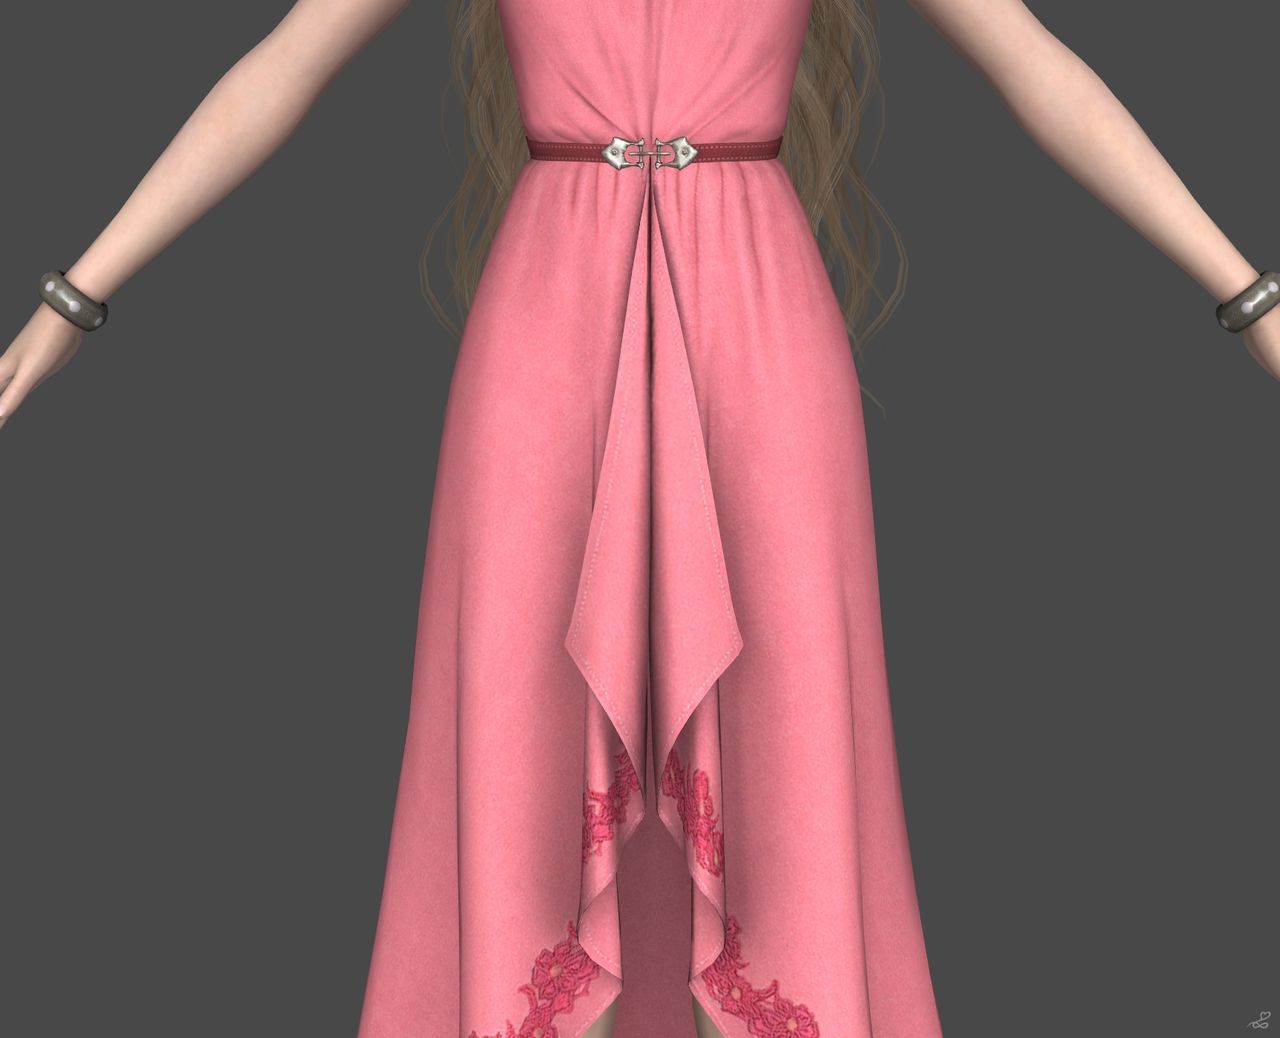 [J.A.] FF7 Remake | Aerith Reference 7